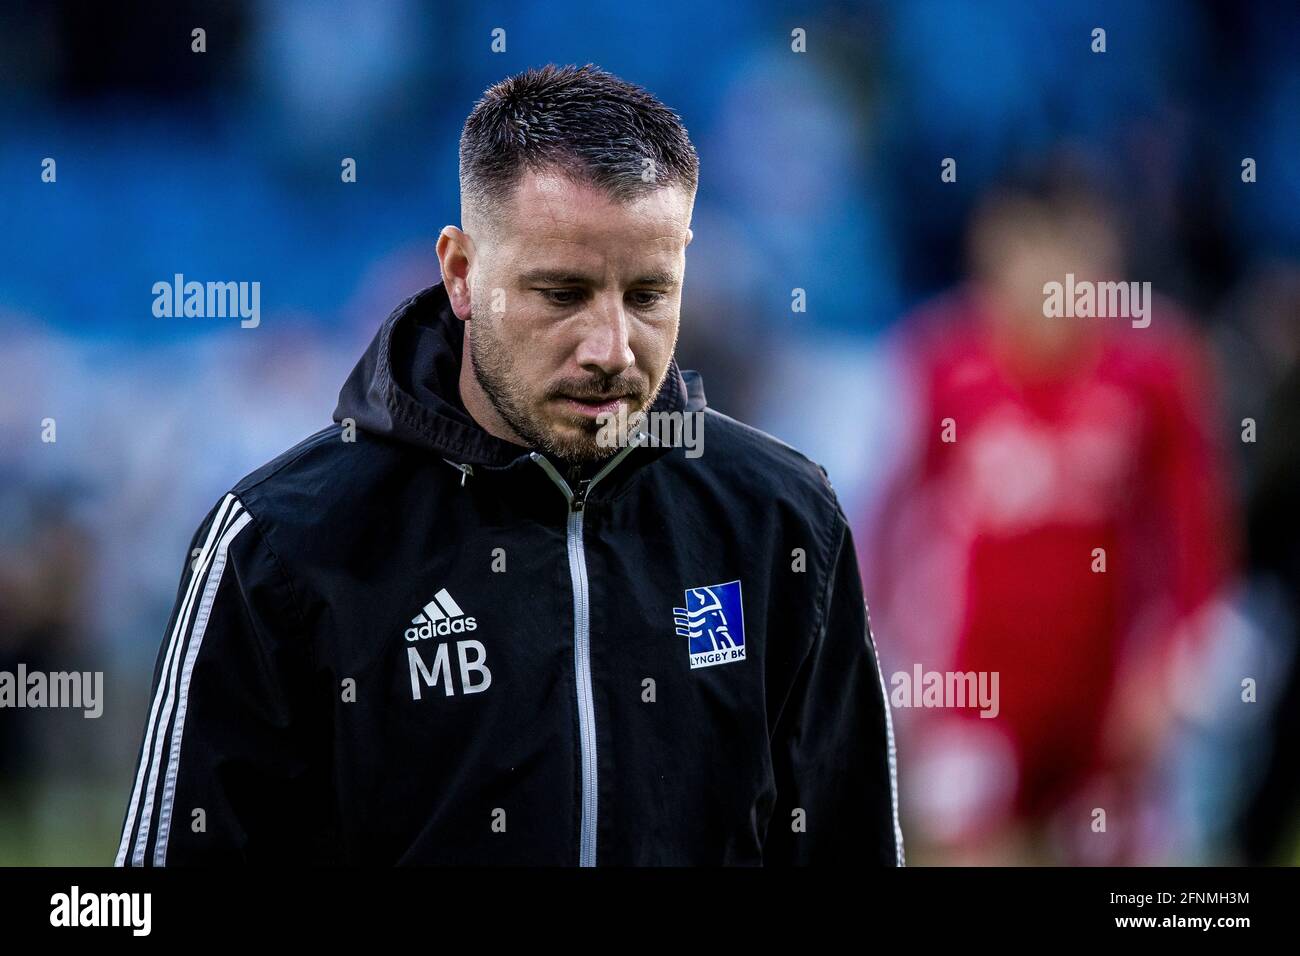 Mikkel Beckmann Denmark High Resolution Stock Photography and Images - Alamy